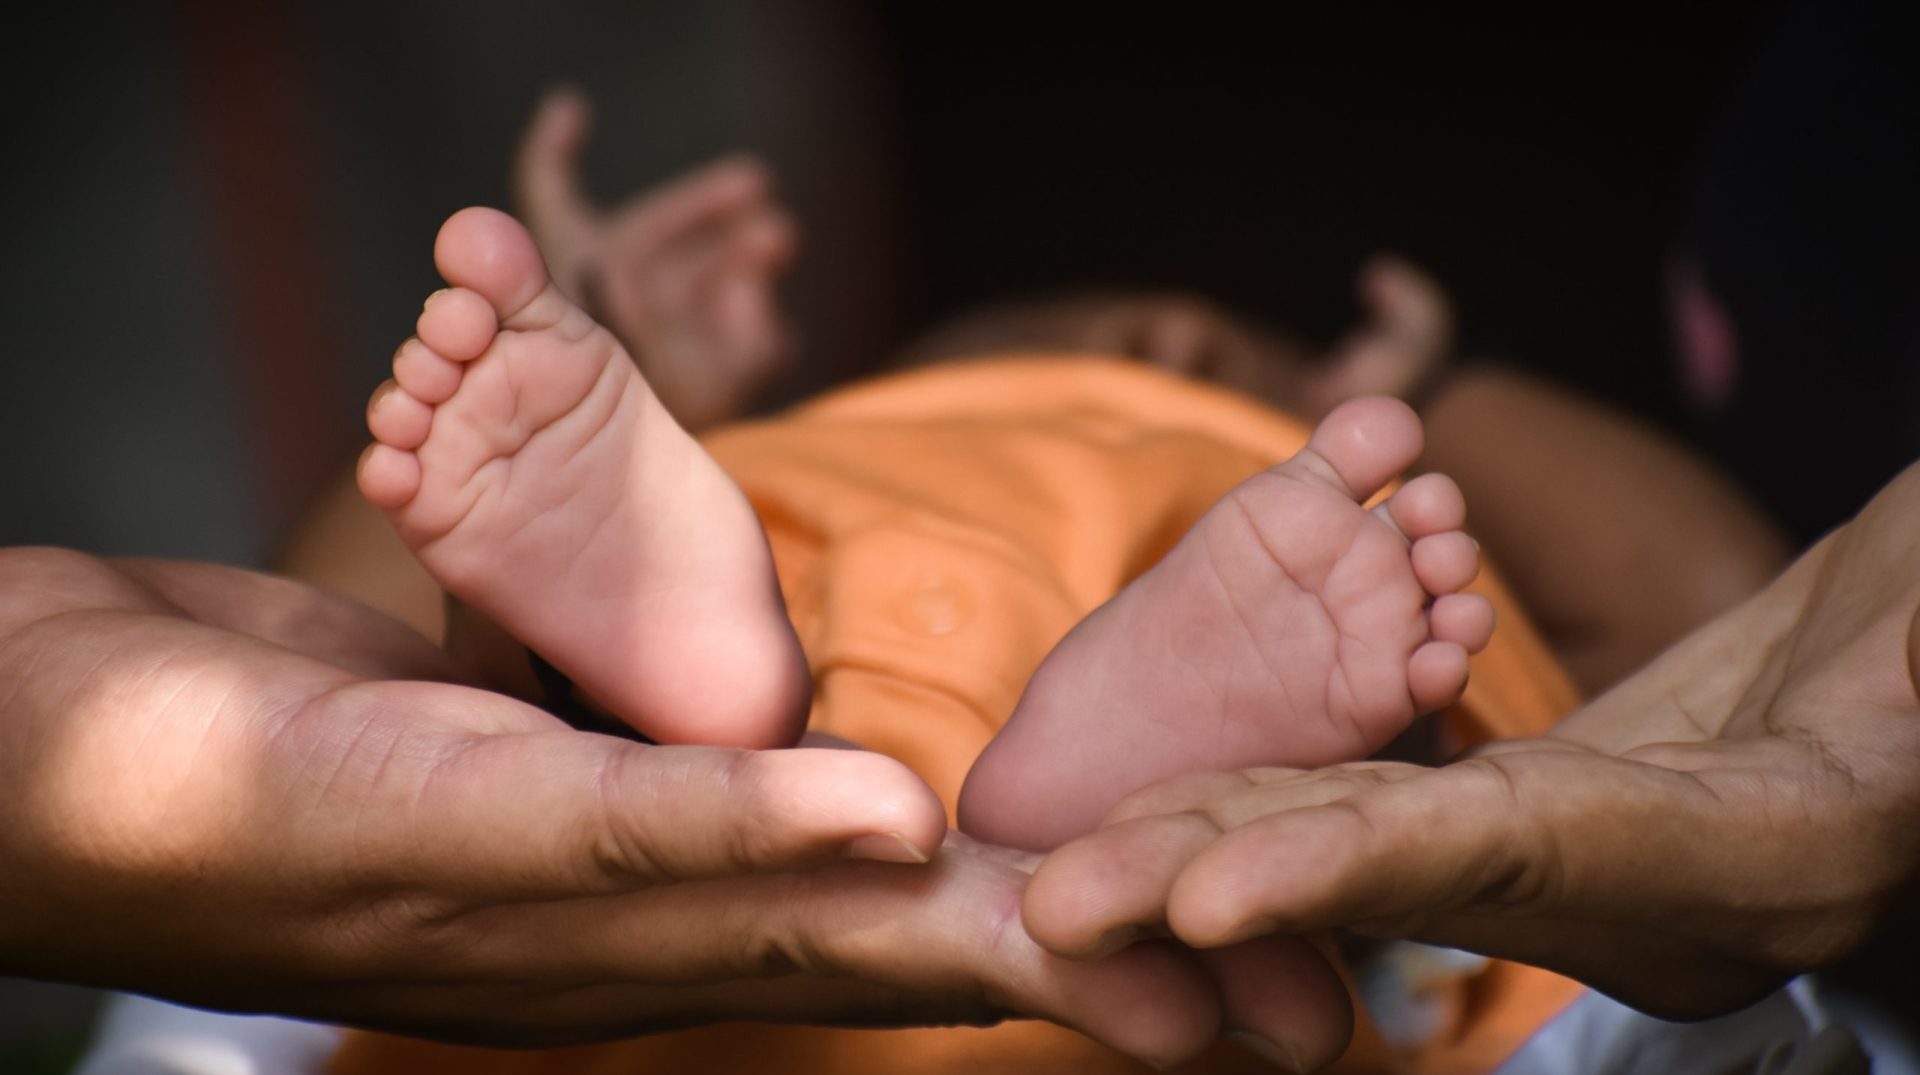 A woman gently holds a tiny baby's foot on a soft blanket, showcasing the tender bond between mother and child.